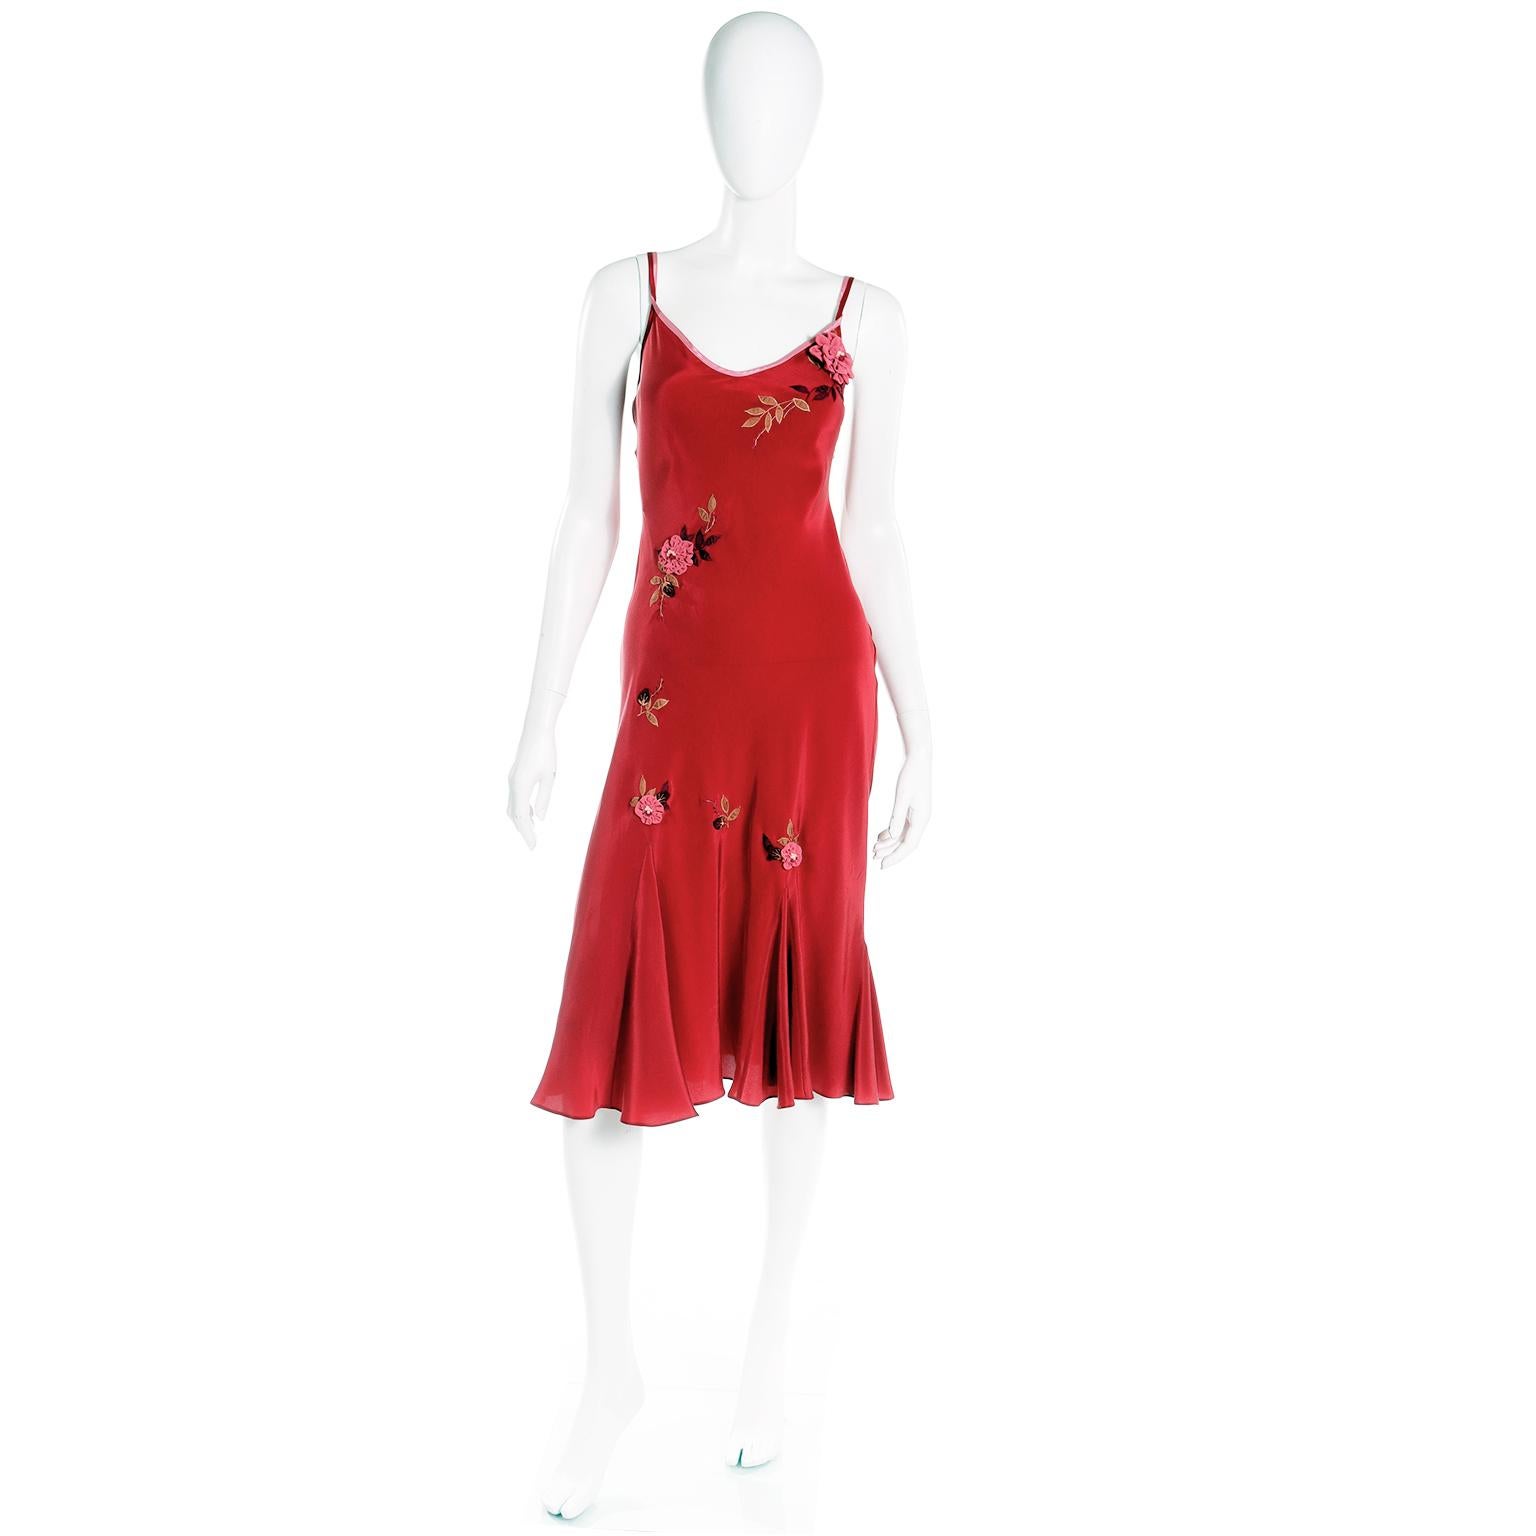 This is a lovely vintage late 1990's or early 2000's Betsey Johnson slip dress in a deep red with pretty pink 3d ruffled flower appliques and embroidered leaves in shades of burgundy and gold. This bias cut evening dress has pink trim at the top and